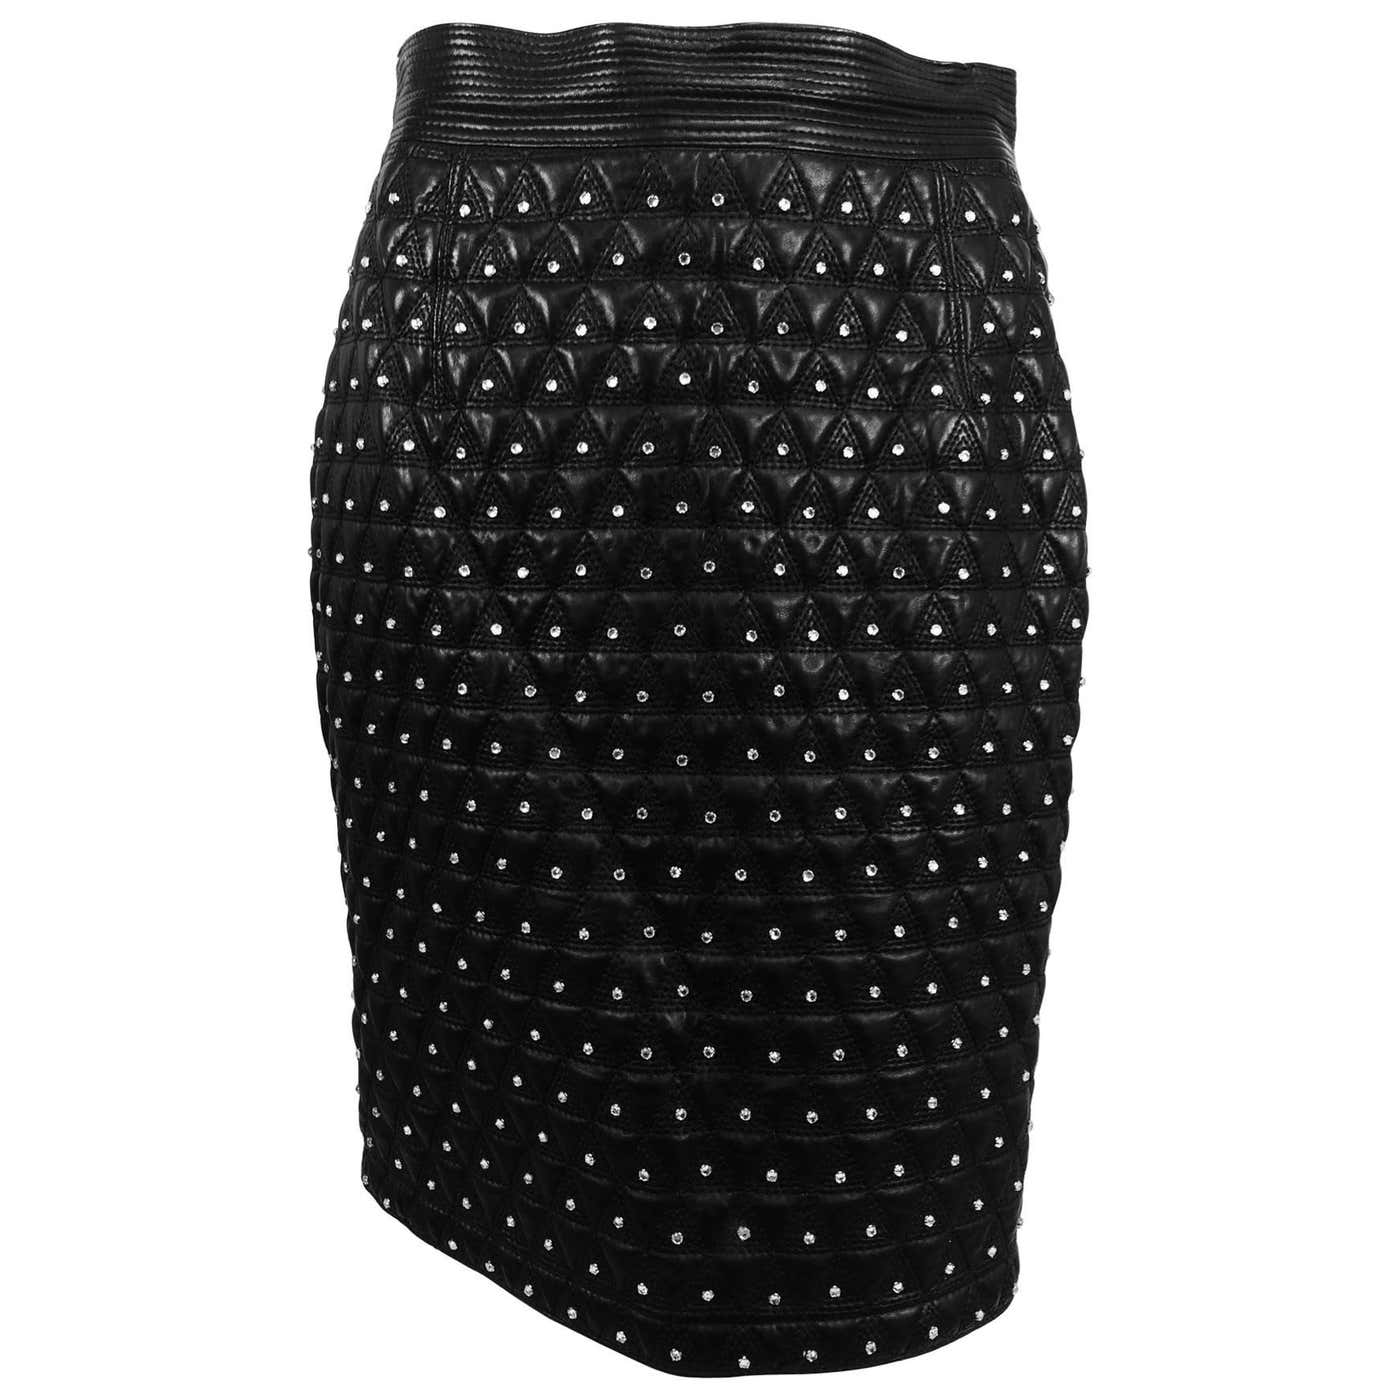 Gianni Versace Quilted black leather and rhinestone skirt 1980s at ...